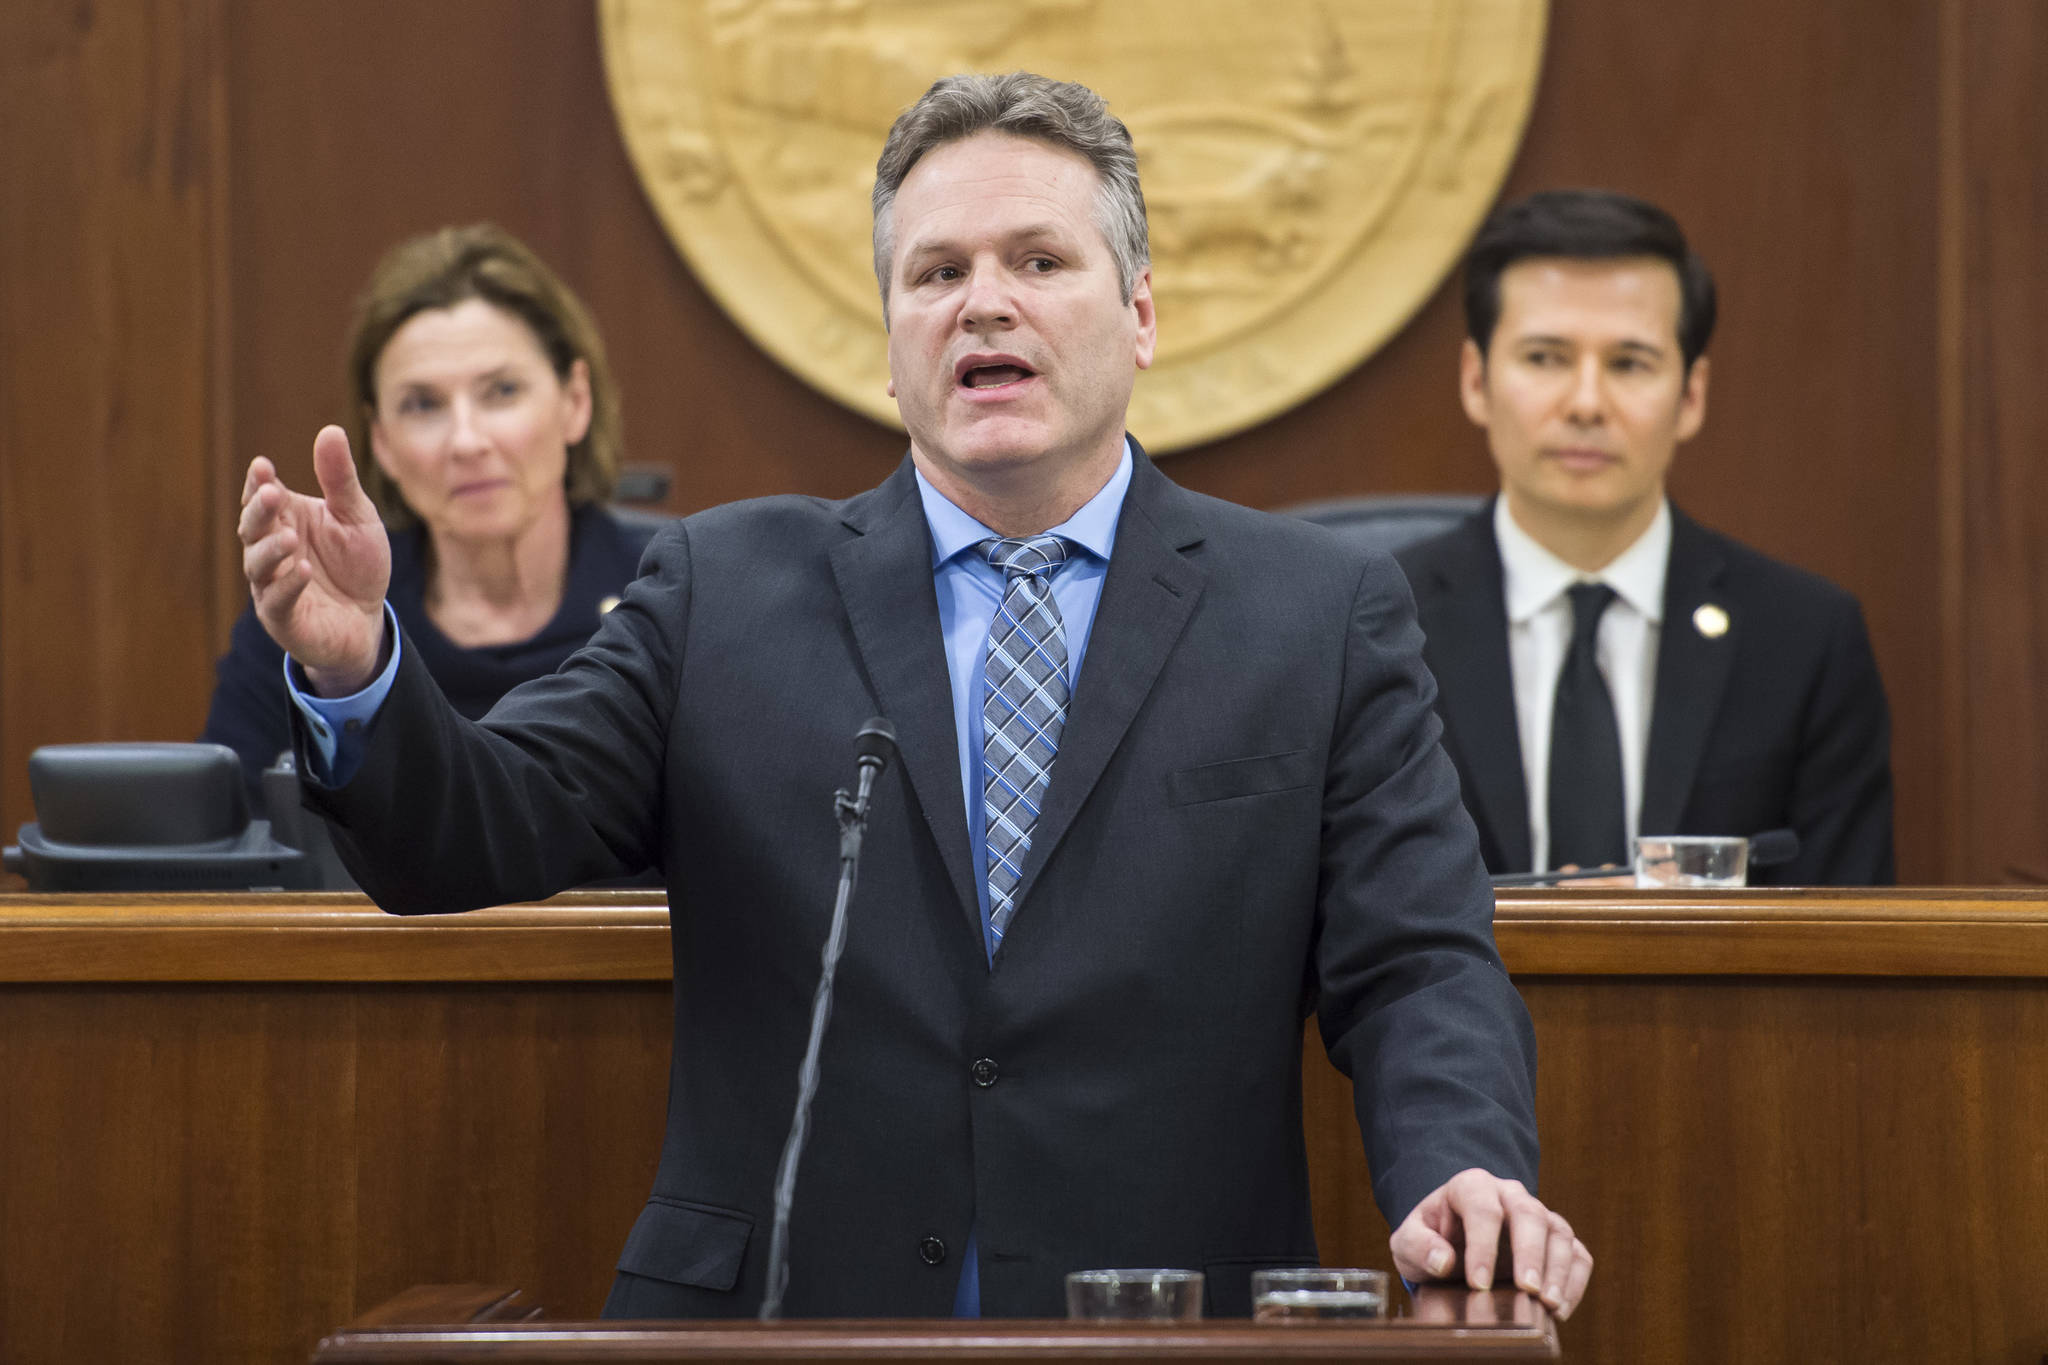 Gov. Mike Dunleavy gives his State of the State speech to a Joint Session of the Alaska Legislature as Senate President Cathy Giessel, R-Anchorage, left, and House Speaker Pro Tempore Rep. Neal Foster, D-Nome, listen at the Capitol on Tuesday, Jan. 22, 2019. (Michael Penn | Juneau Empire)